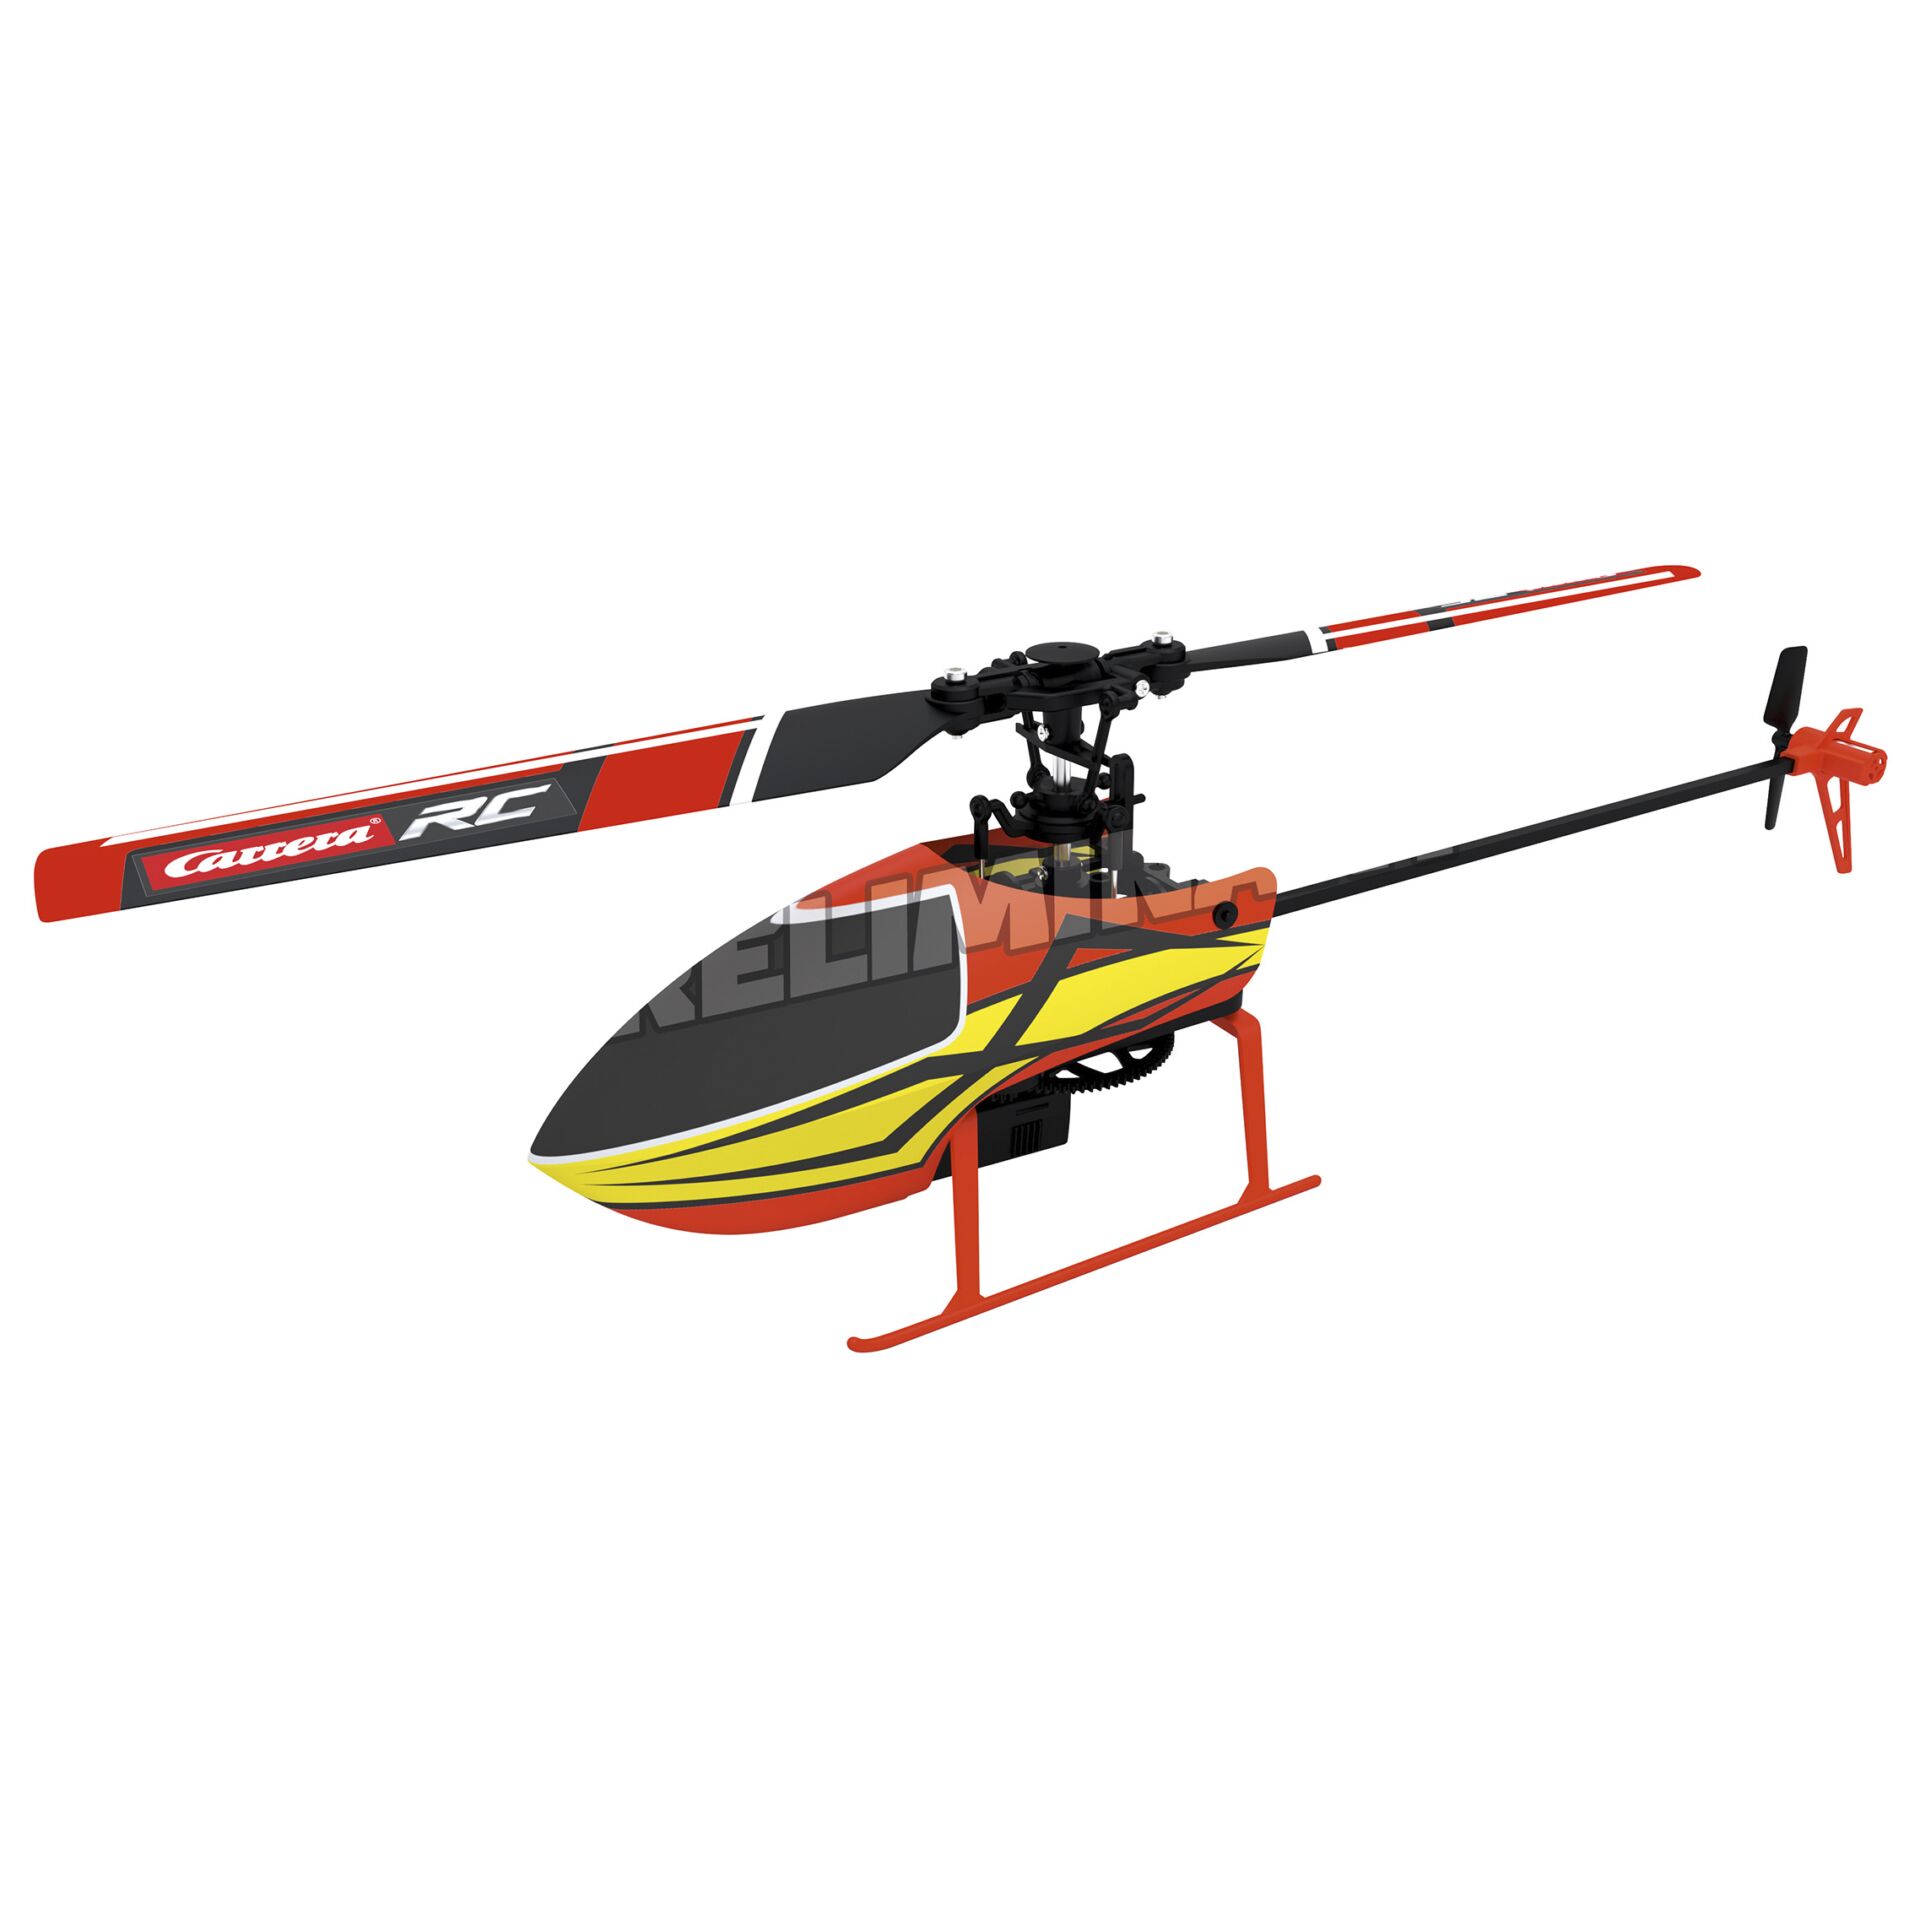 Carrera RC 2,4 GHz 370501047 Single Blade Helicopter SX1